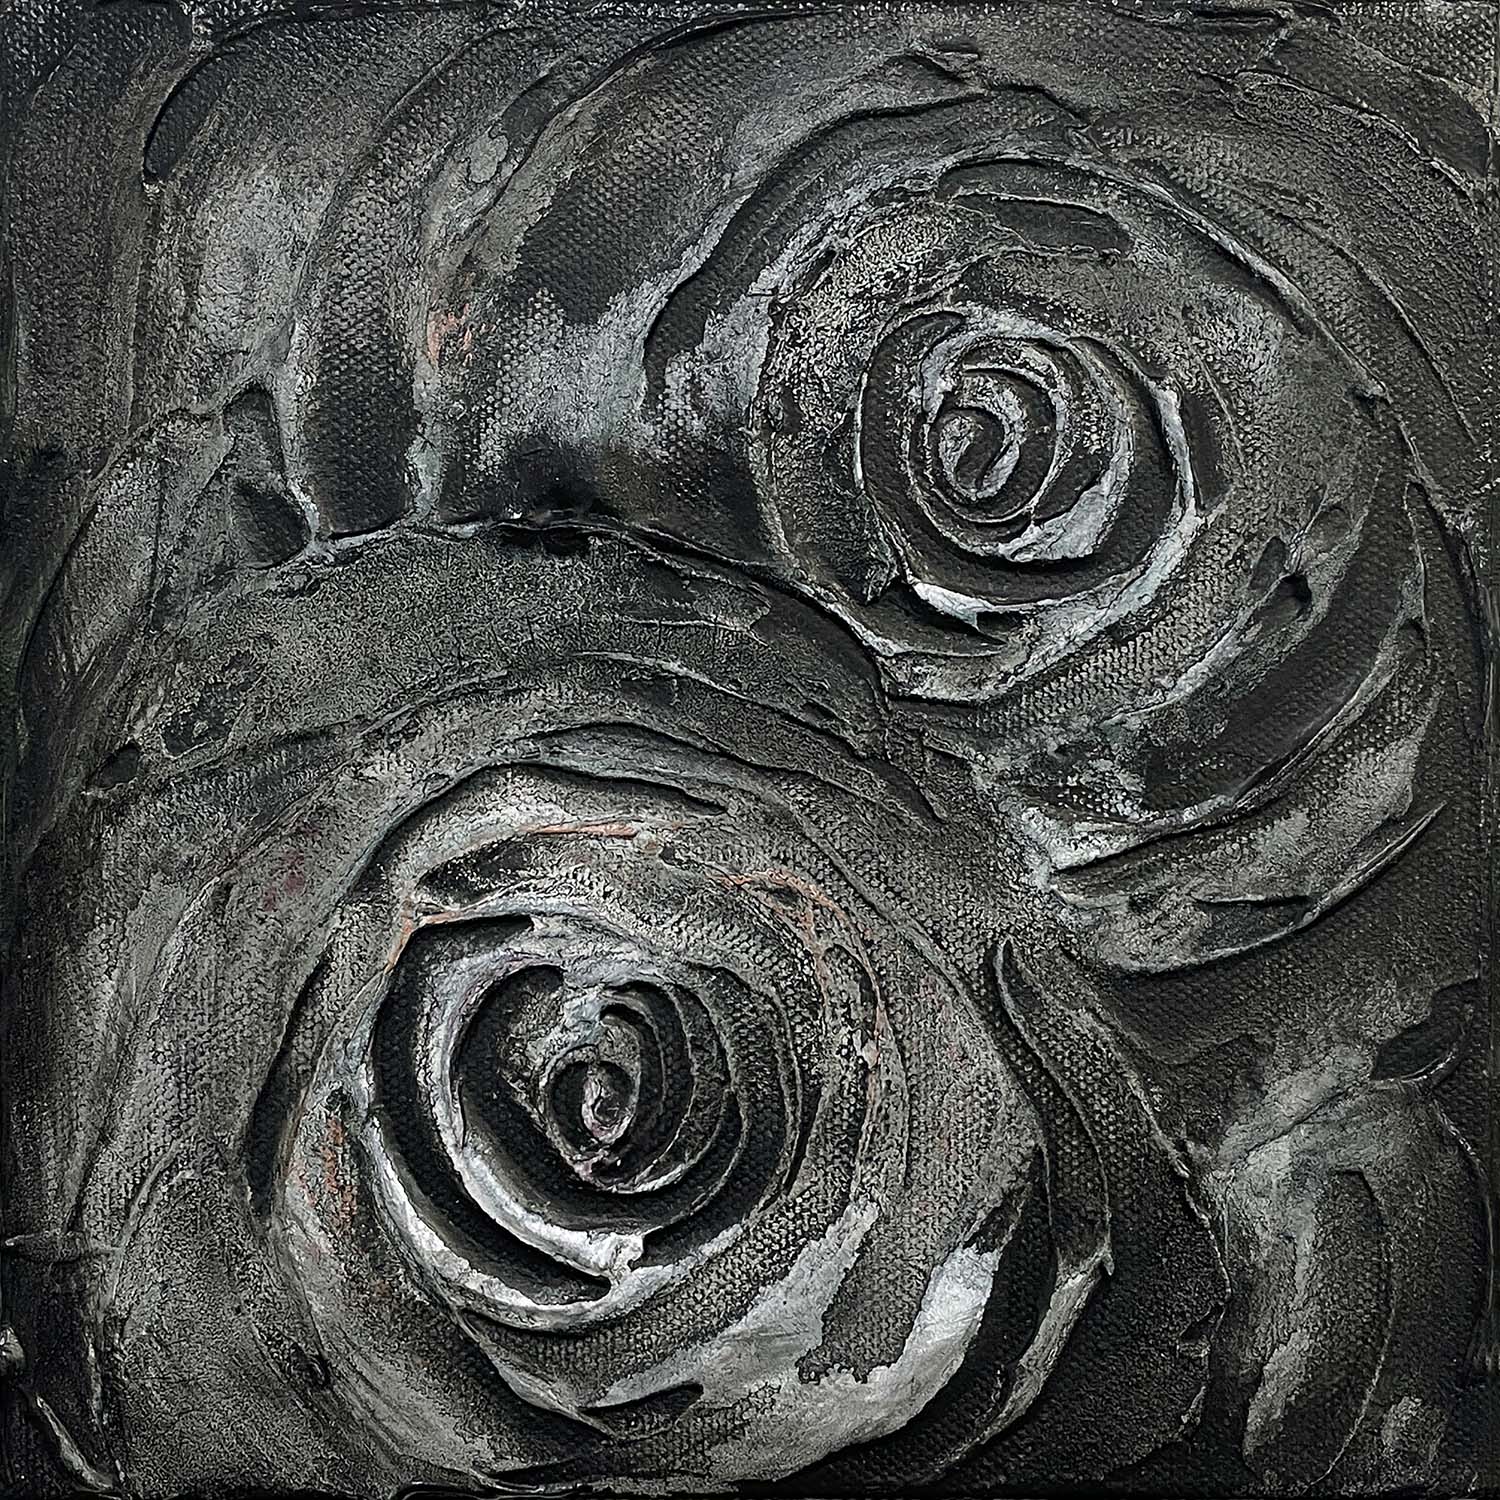 Healing7 abstract rose painting